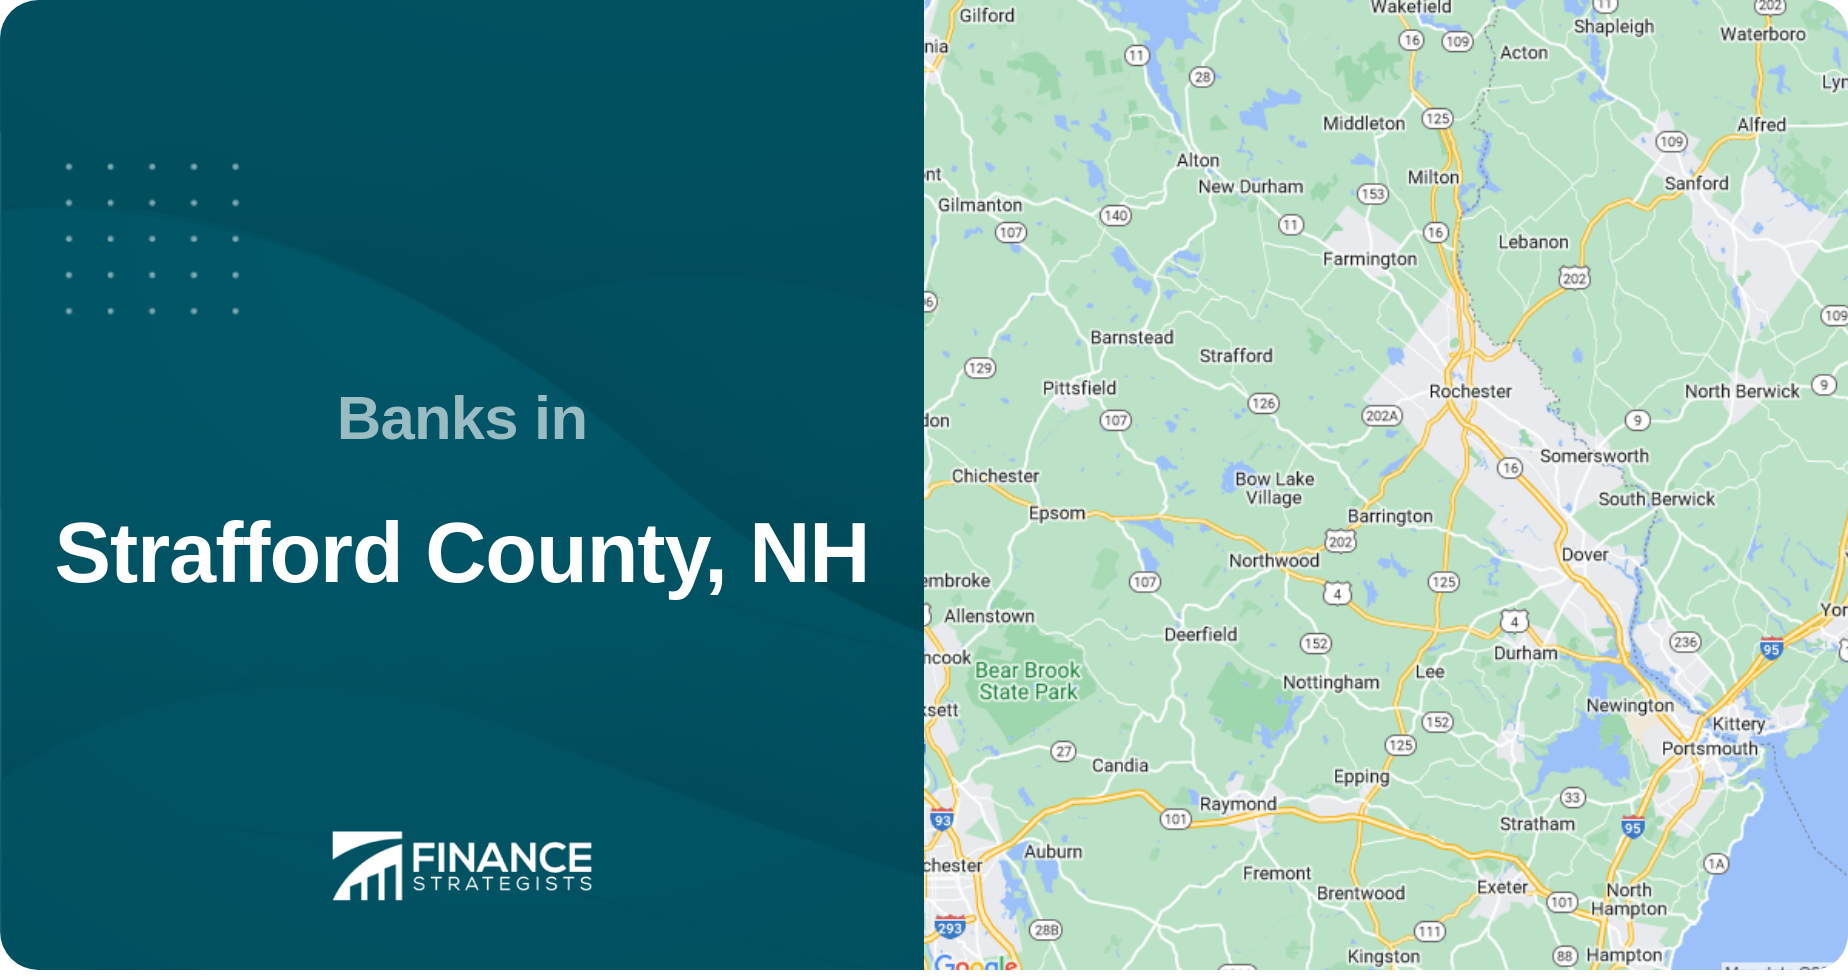 Banks in Strafford County, NH